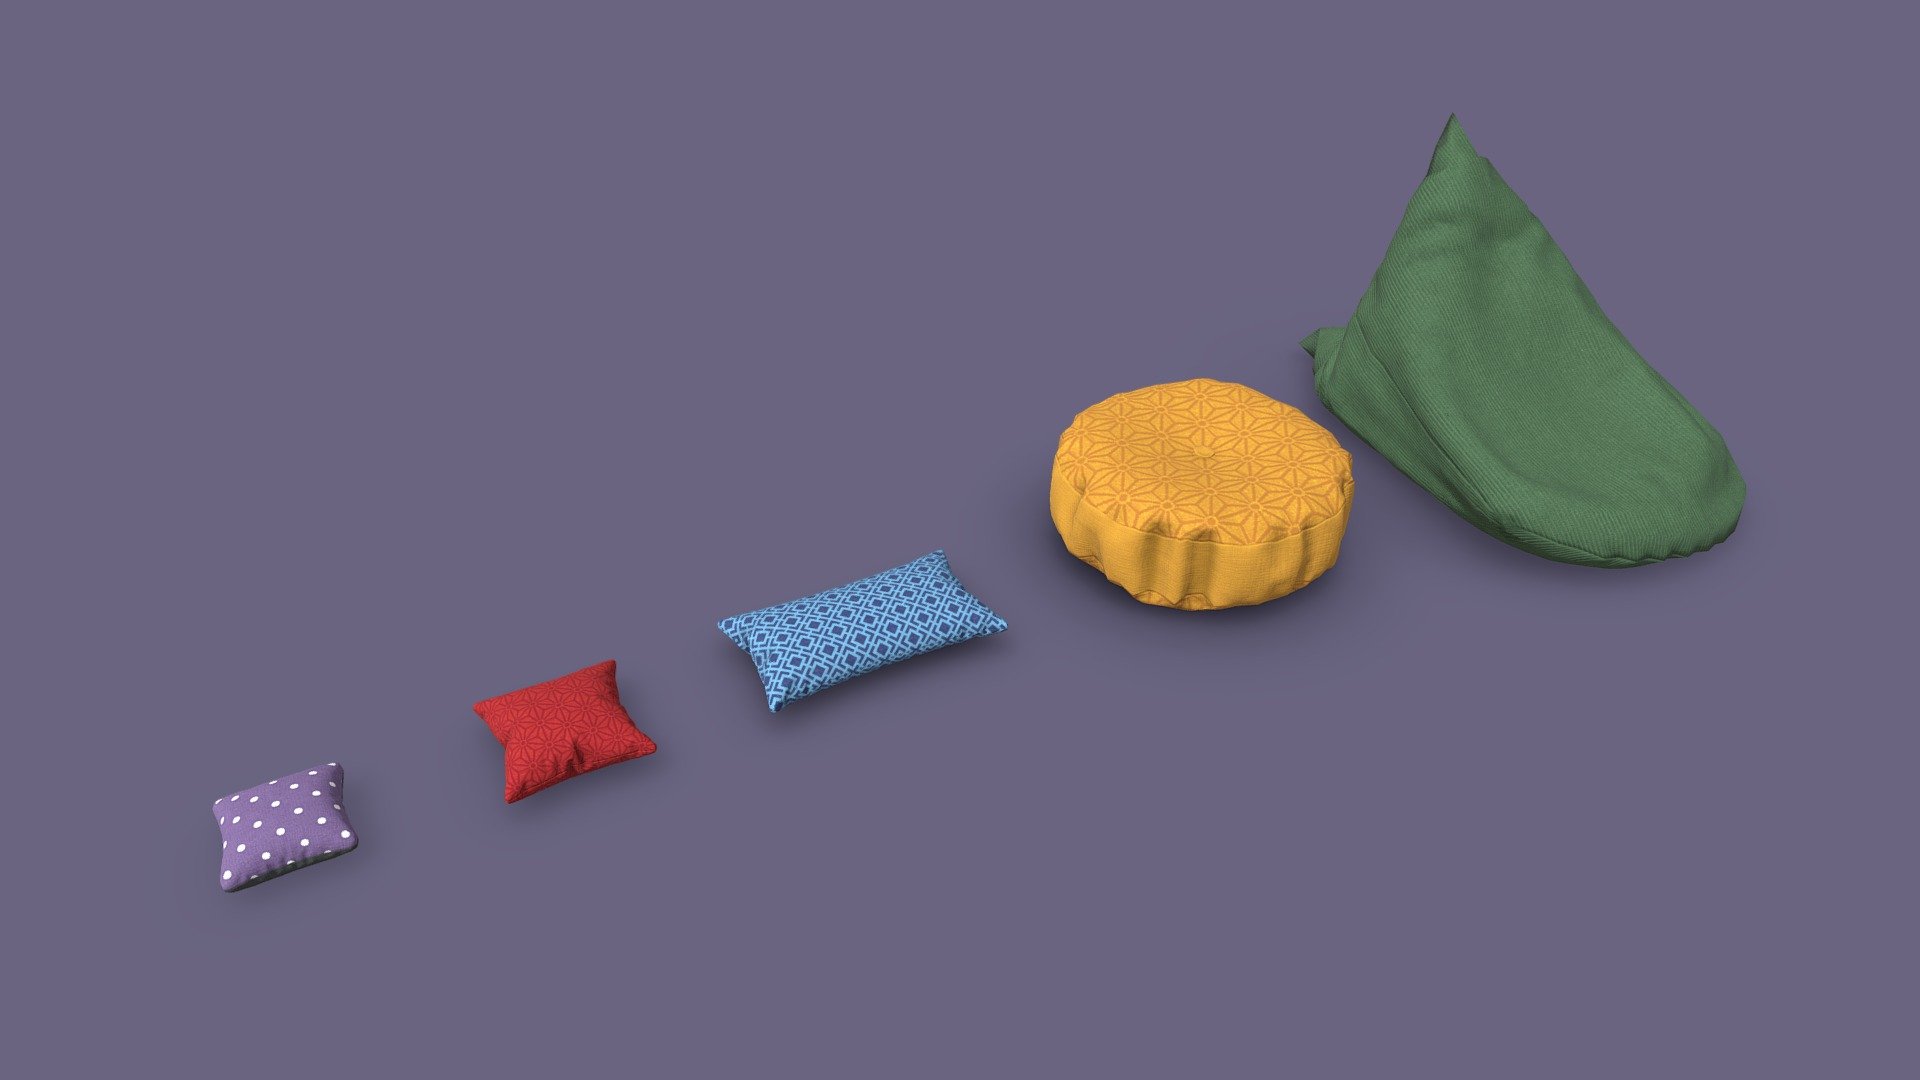 Set of cusions and beanbag I created for a larger scene 3d model